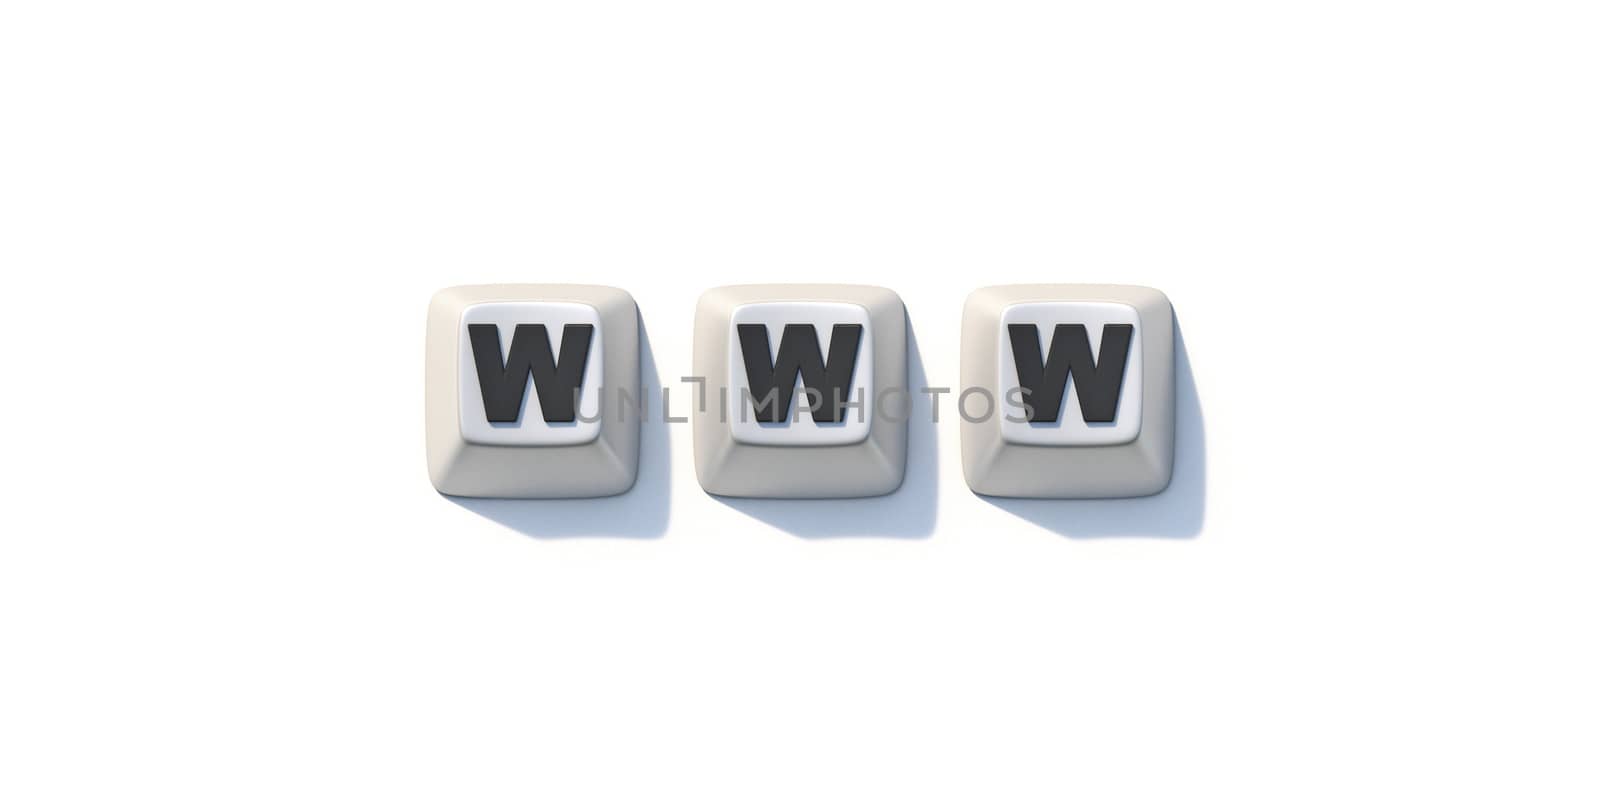 Word WWW made of white computer keys 3D render illustration isolated on white background